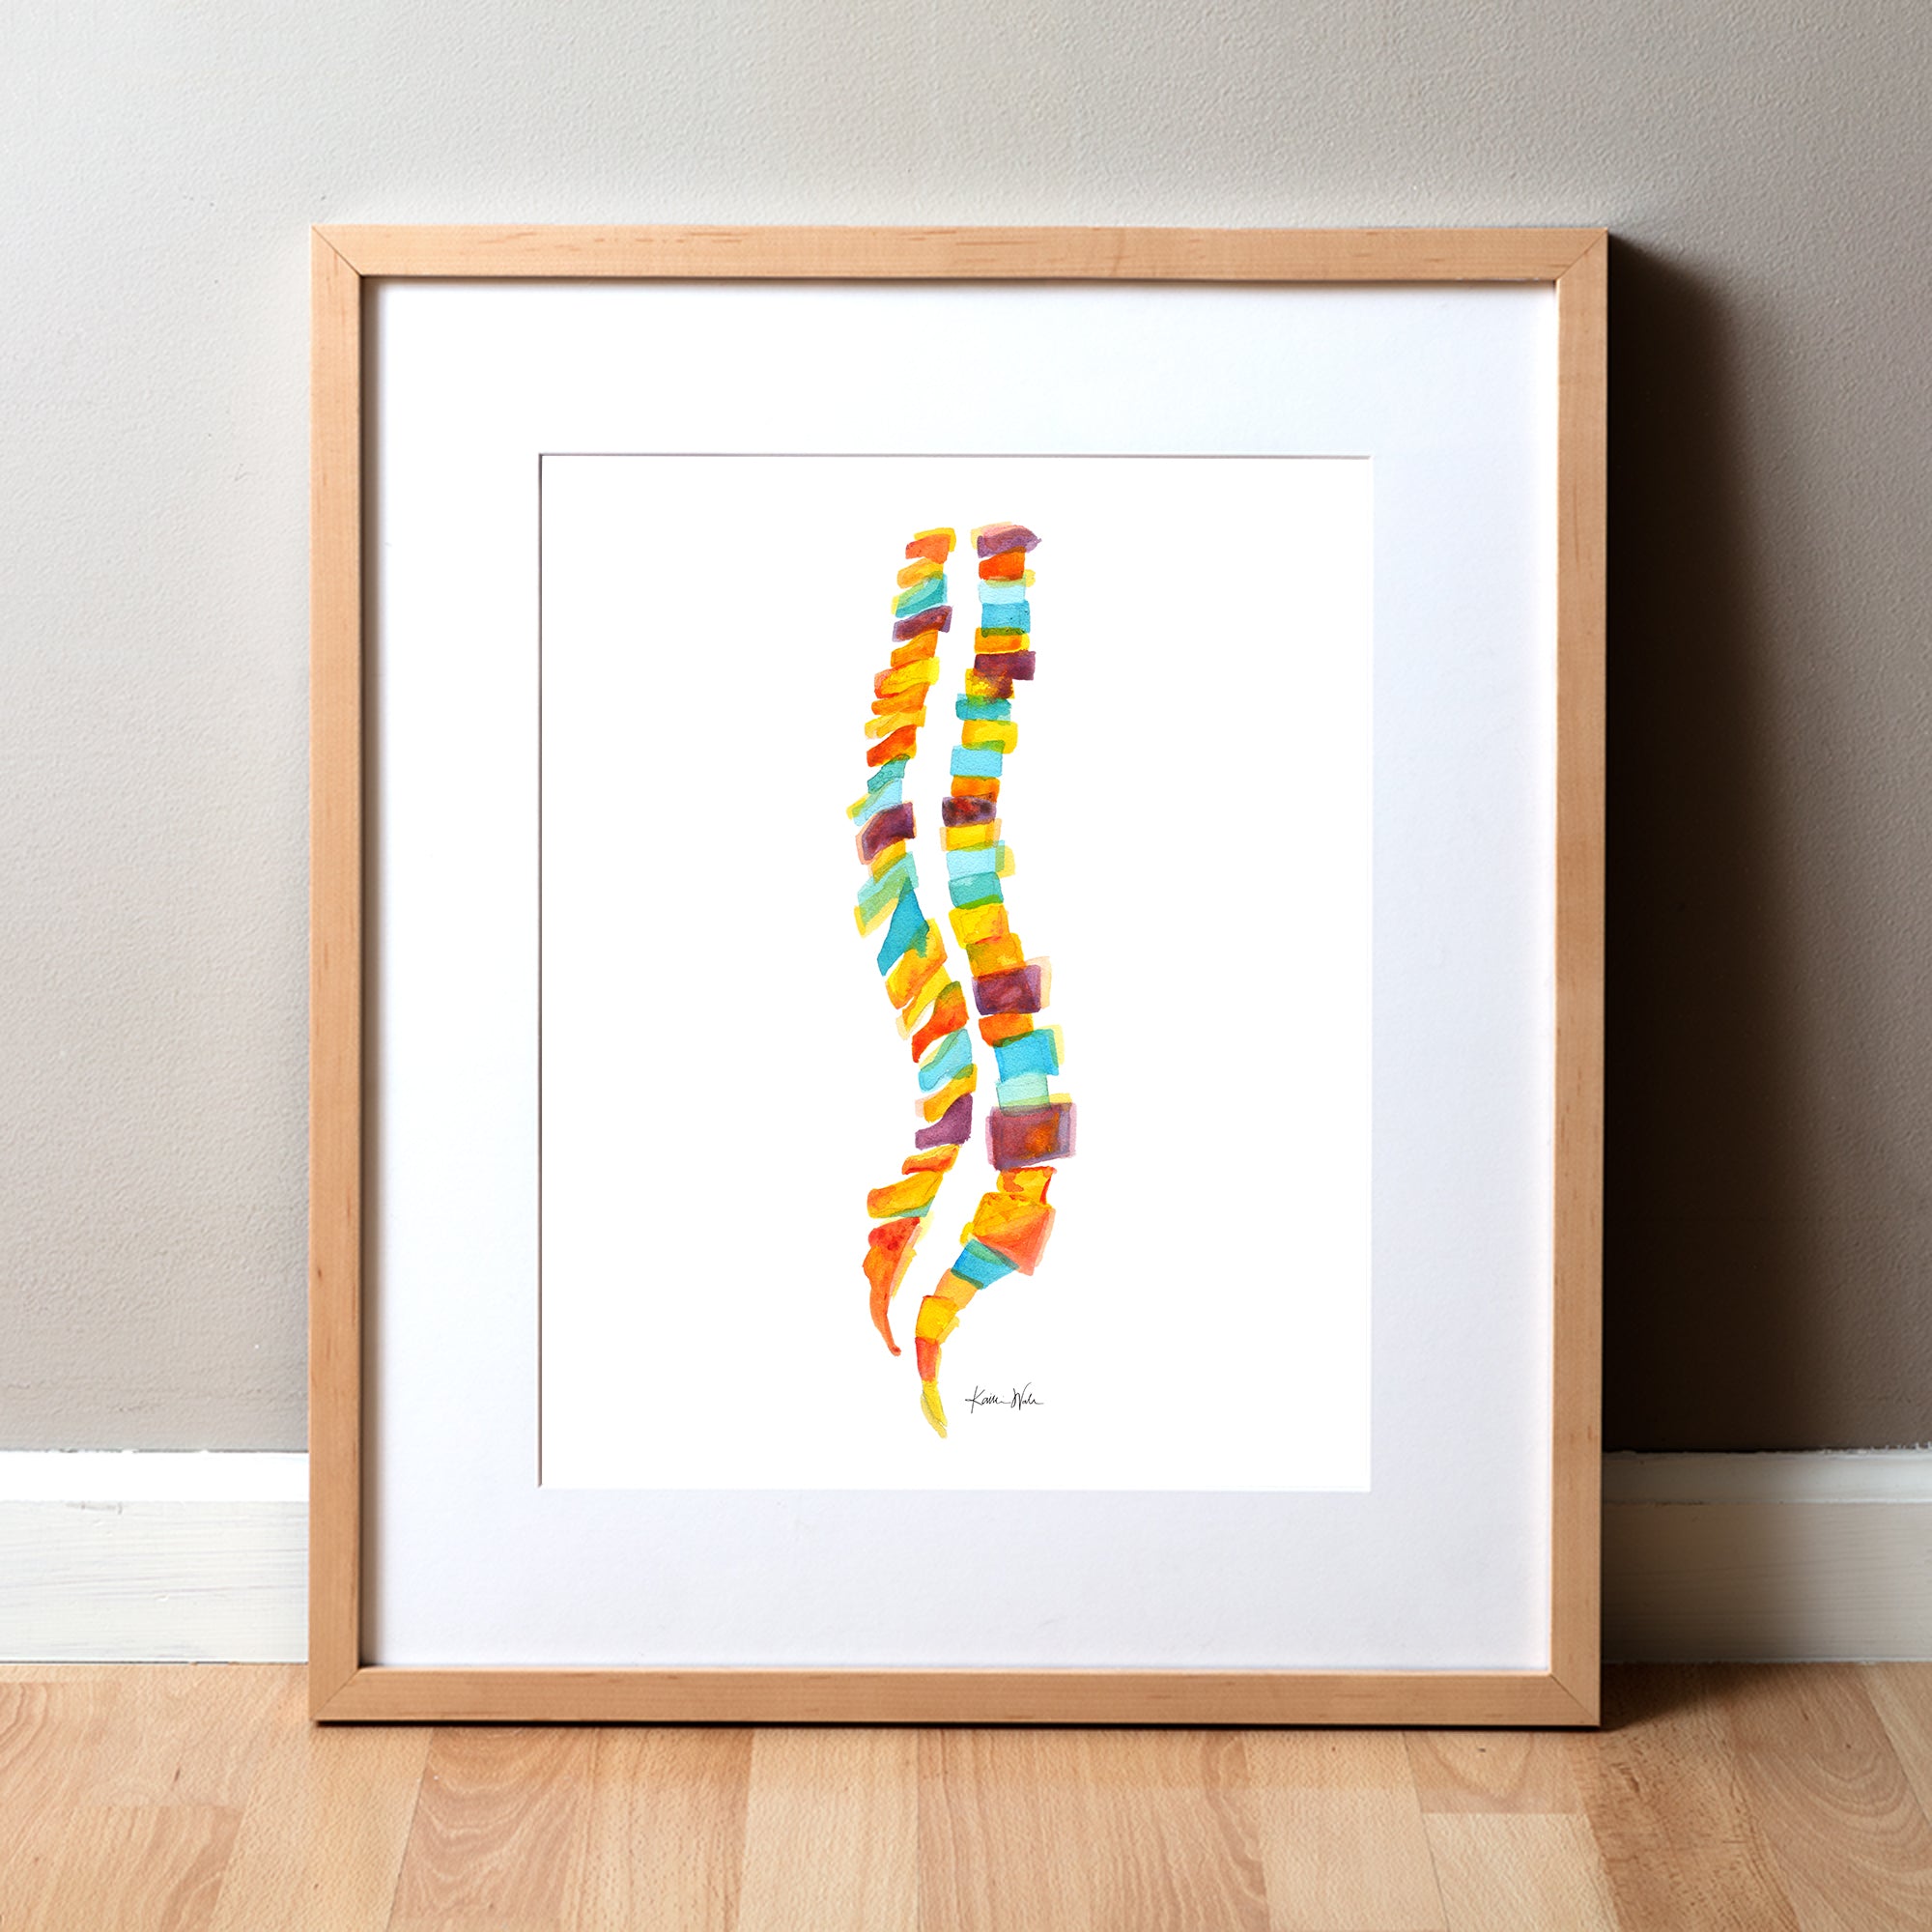 Framed watercolor painting of a spinal columns in yellow, orange, burgundy and teal.